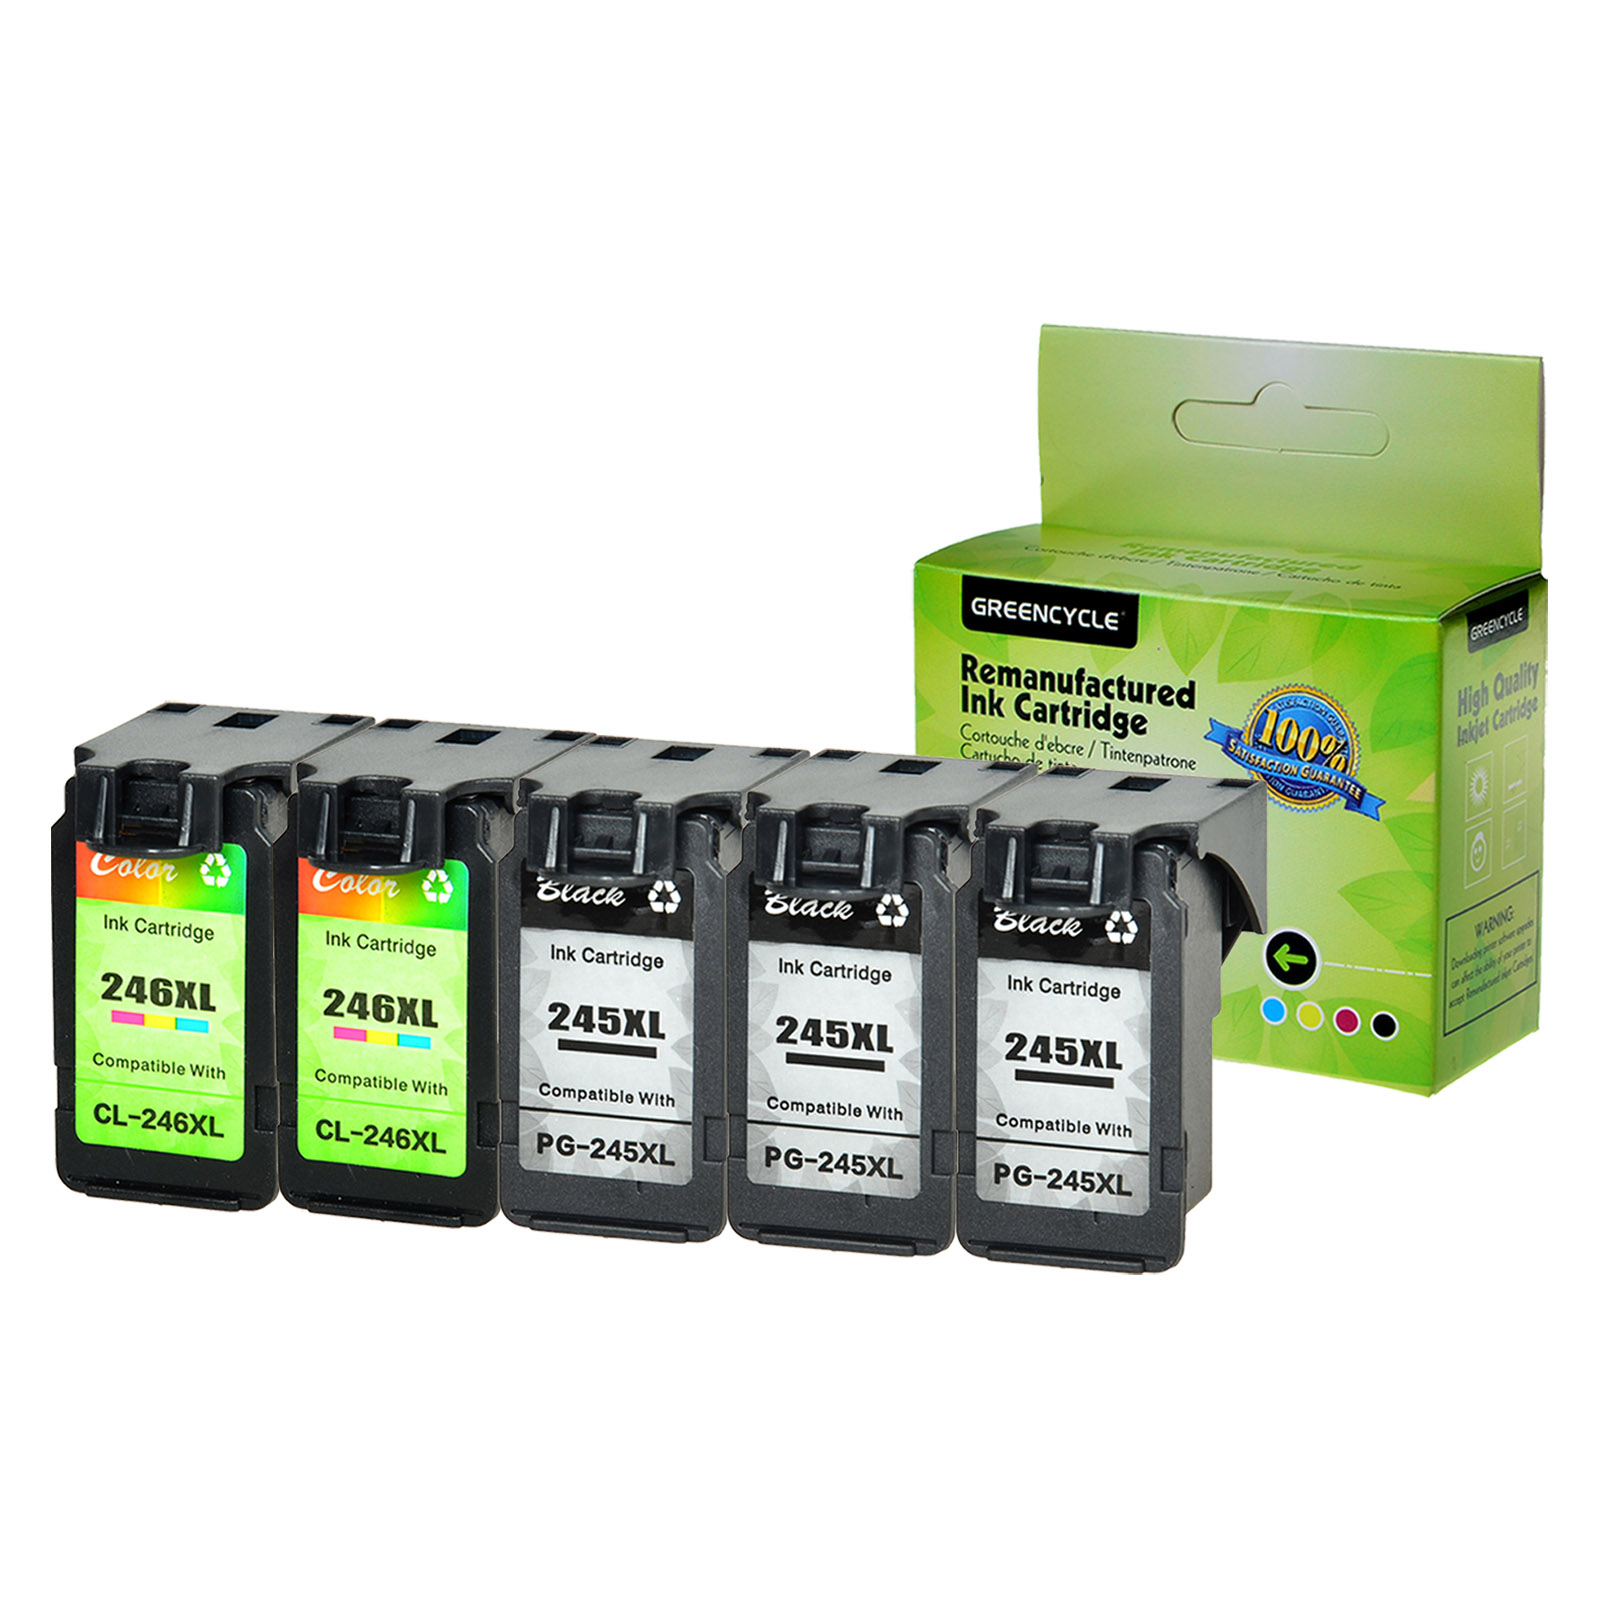 GREENCYCLE Ink Cartridge Remanufactured PG-245XL CL-246XL (3 Black & 2 Color) 5 Pack for Canon PIXMA Printer - Show Ink Level